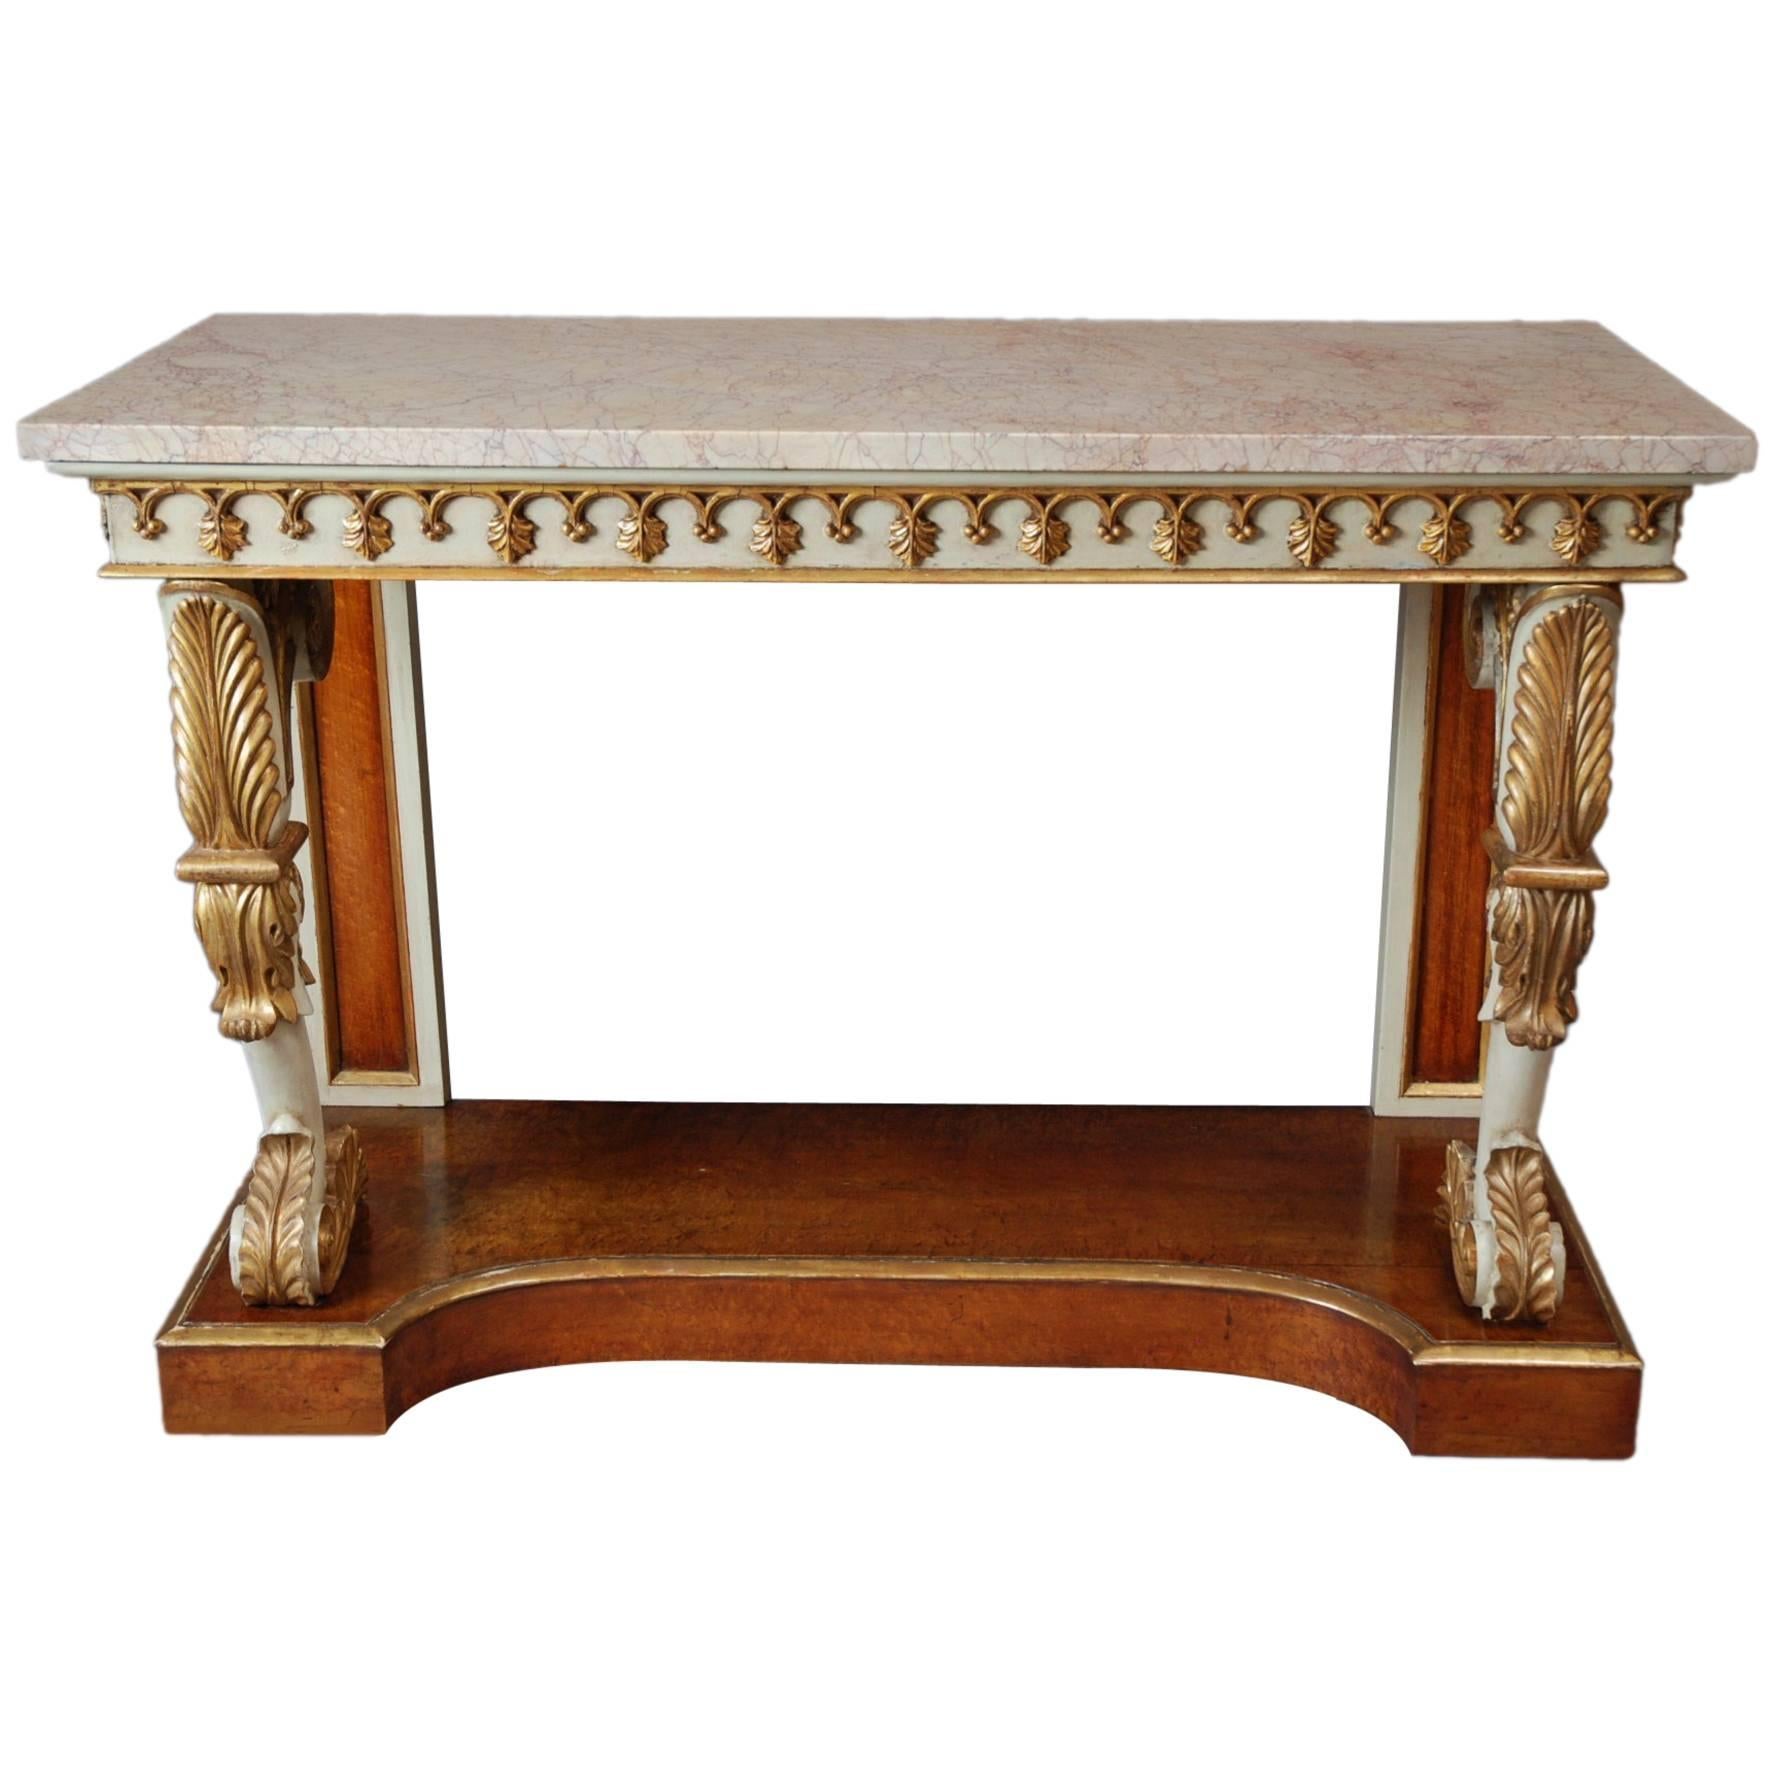 English Regency Gilt and Painted Burr Maple Console Table For Sale